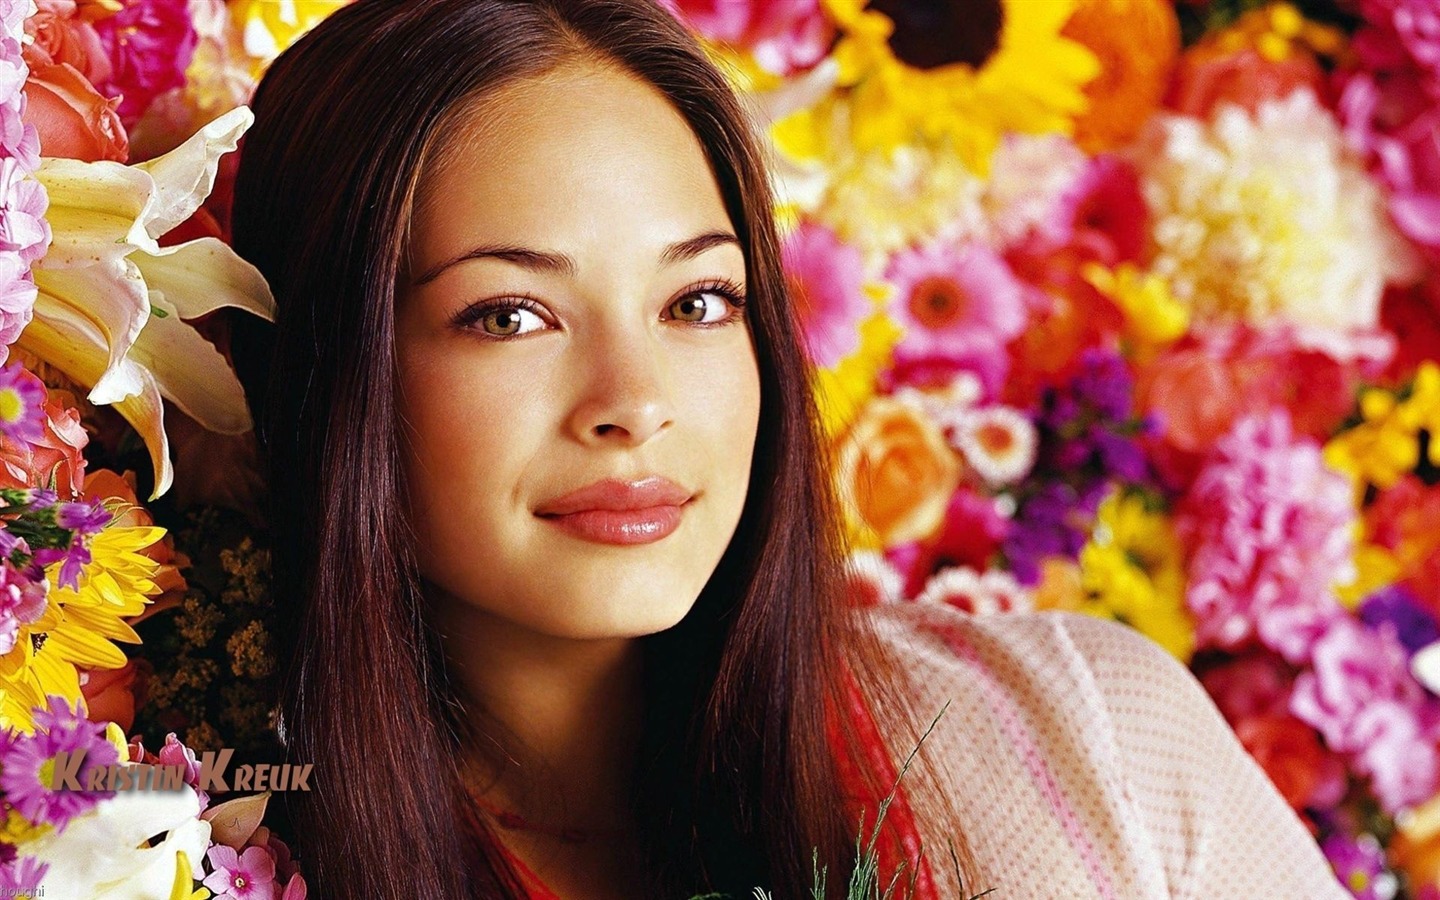 Kristin Kreuk #006 - 1440x900 Wallpapers Pictures Photos Images